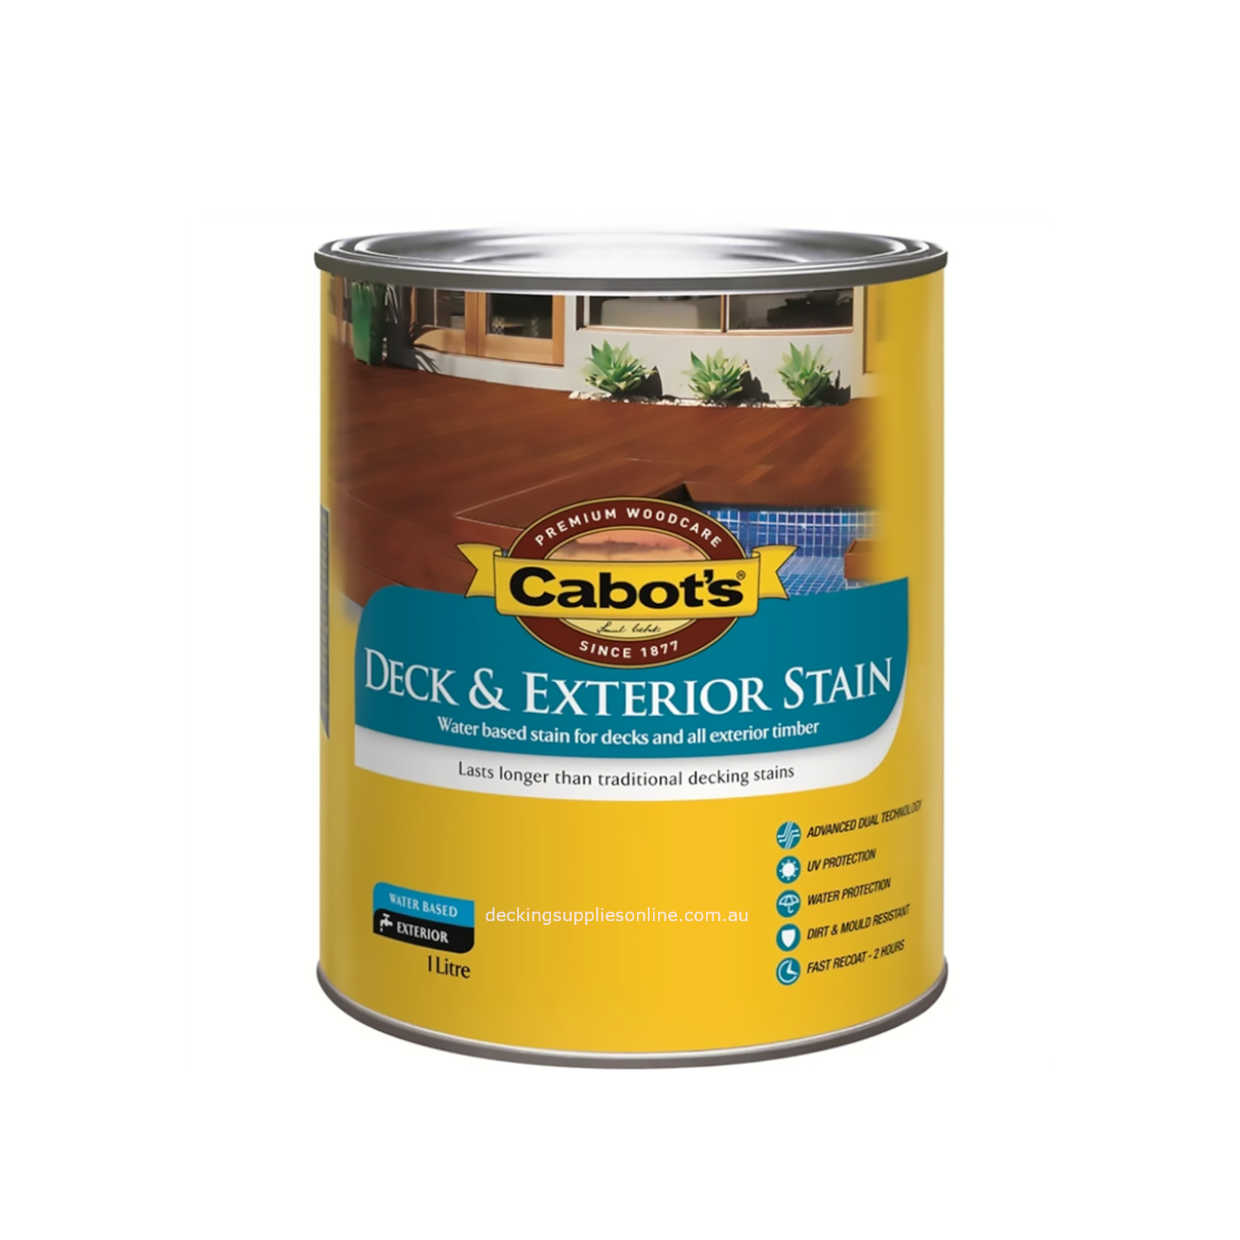 Cabots_Deck___Exterior_Stain_Water_Based_1_litre_Decking_Supplies_Online